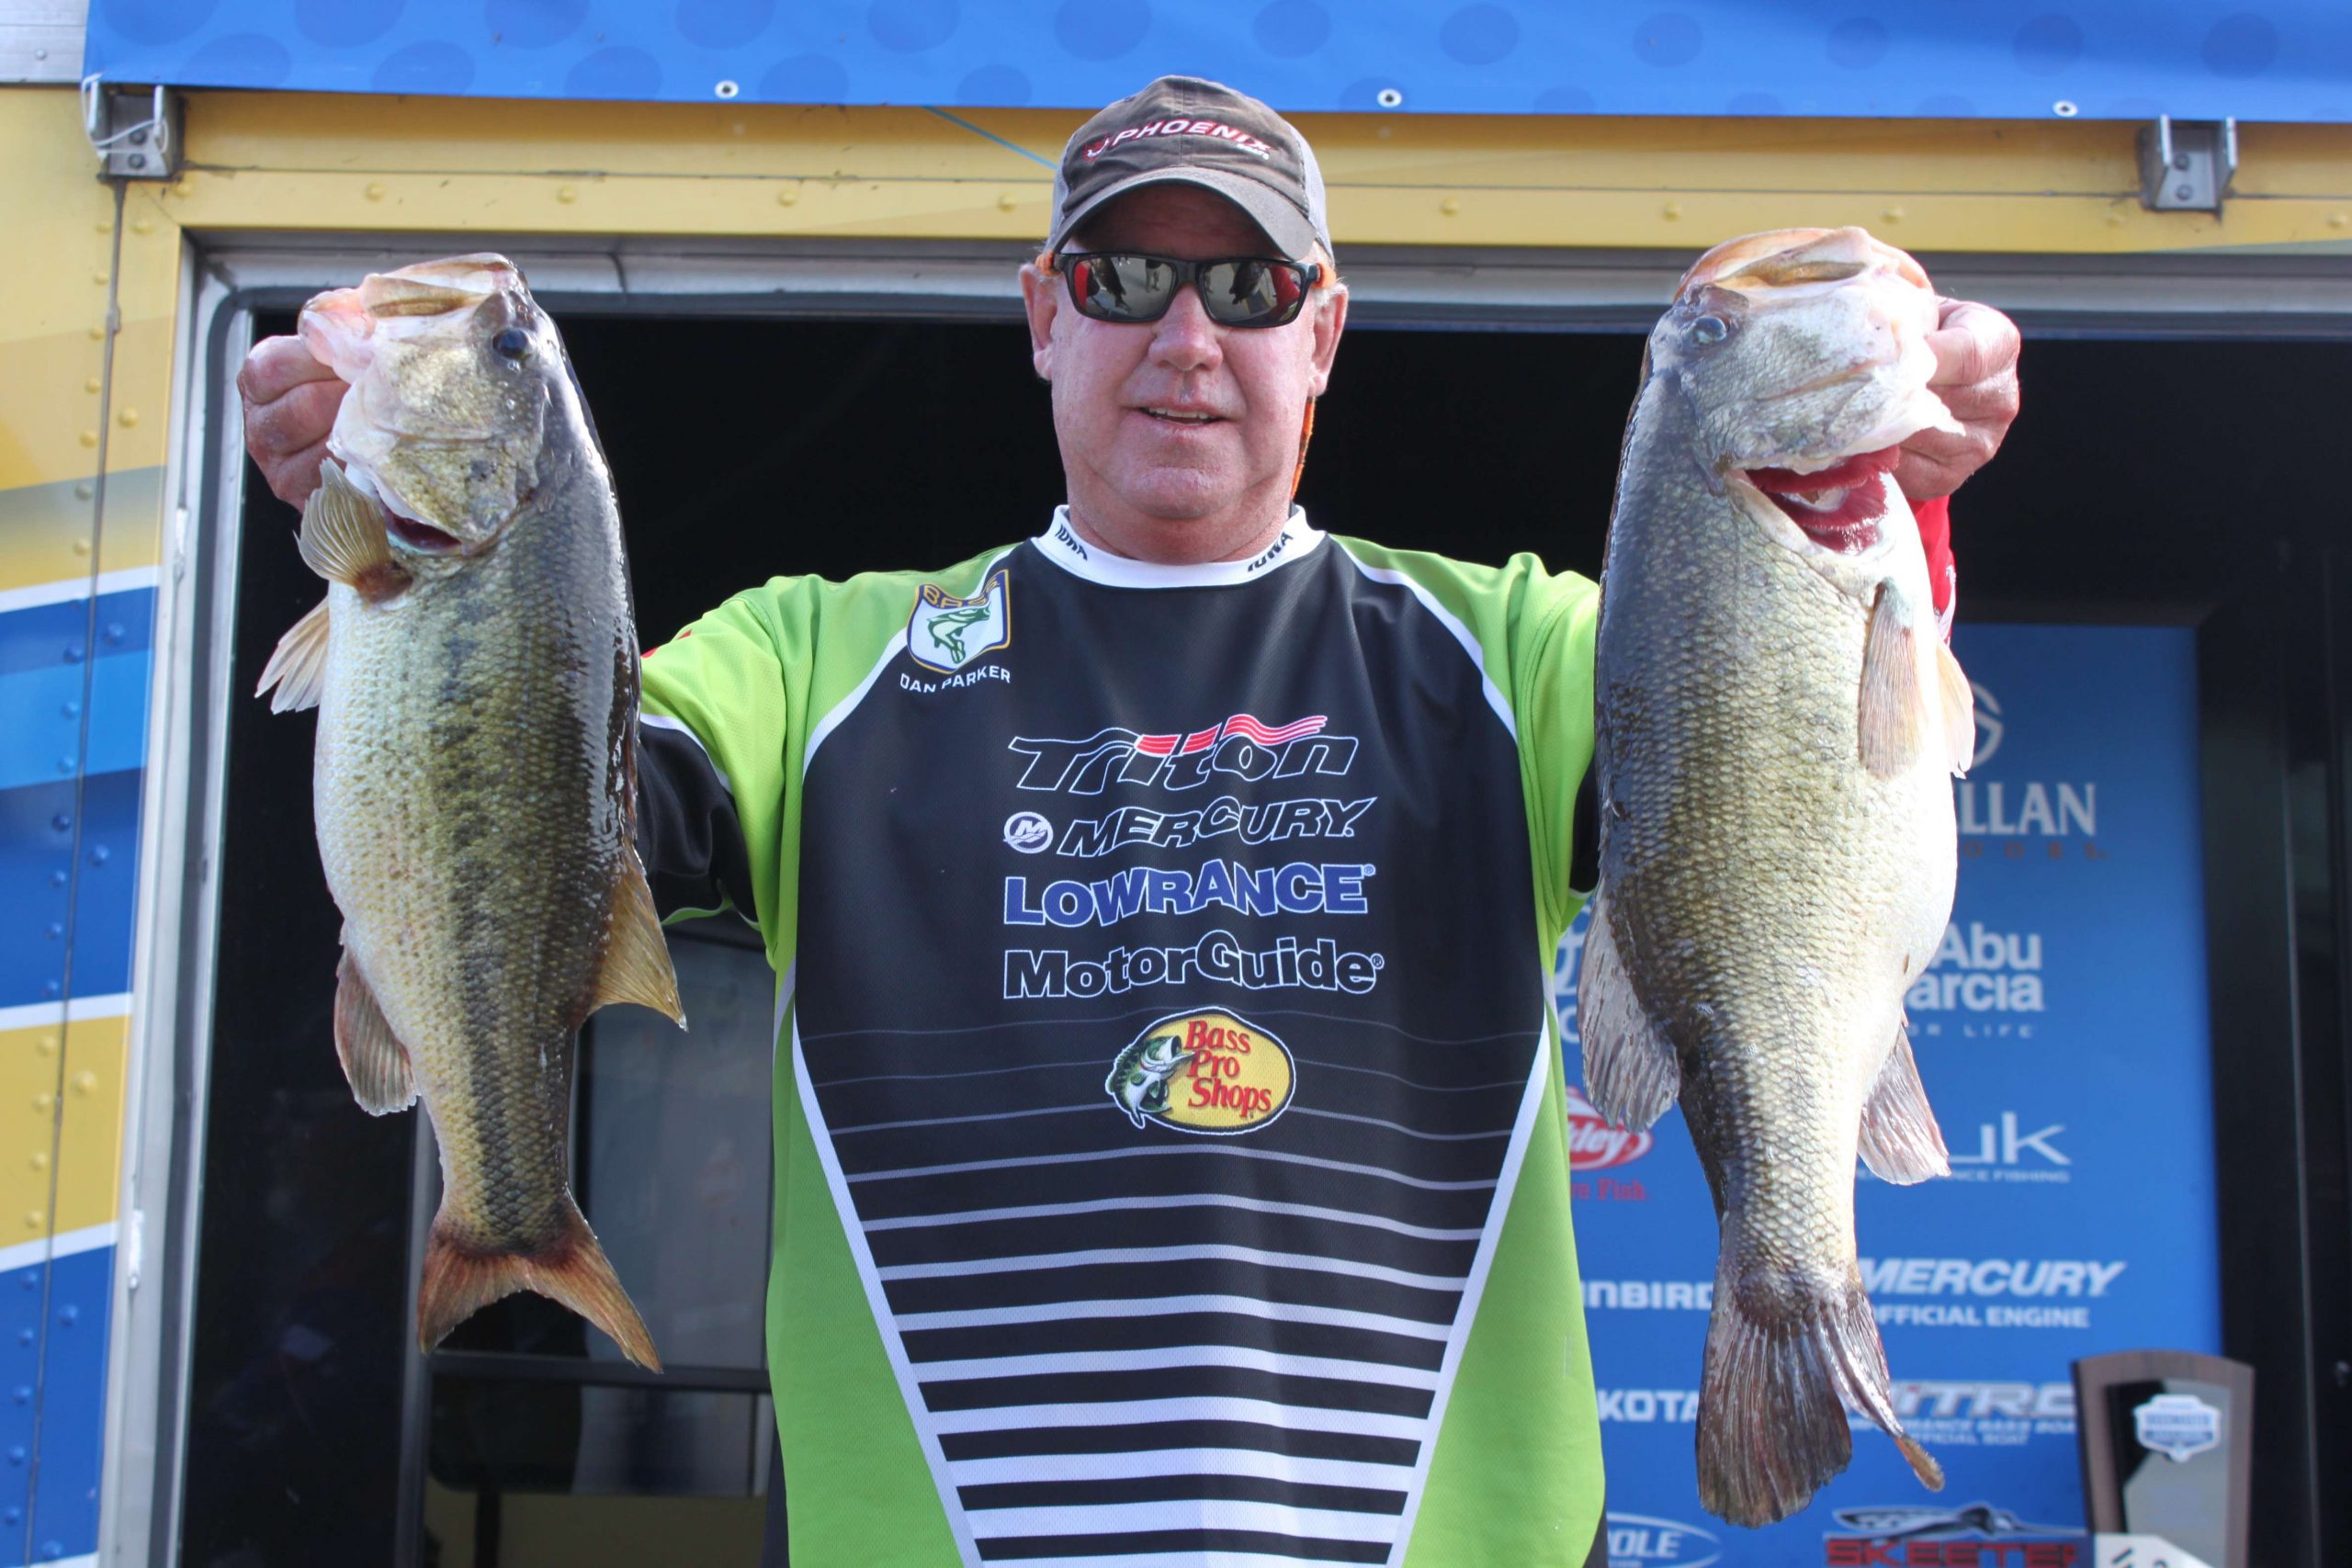 Thereâs Dan Parker again showing off some of the bag that totaled a Day 3 high of 23-9. Parker finished third in the boater division with 54 pounds.